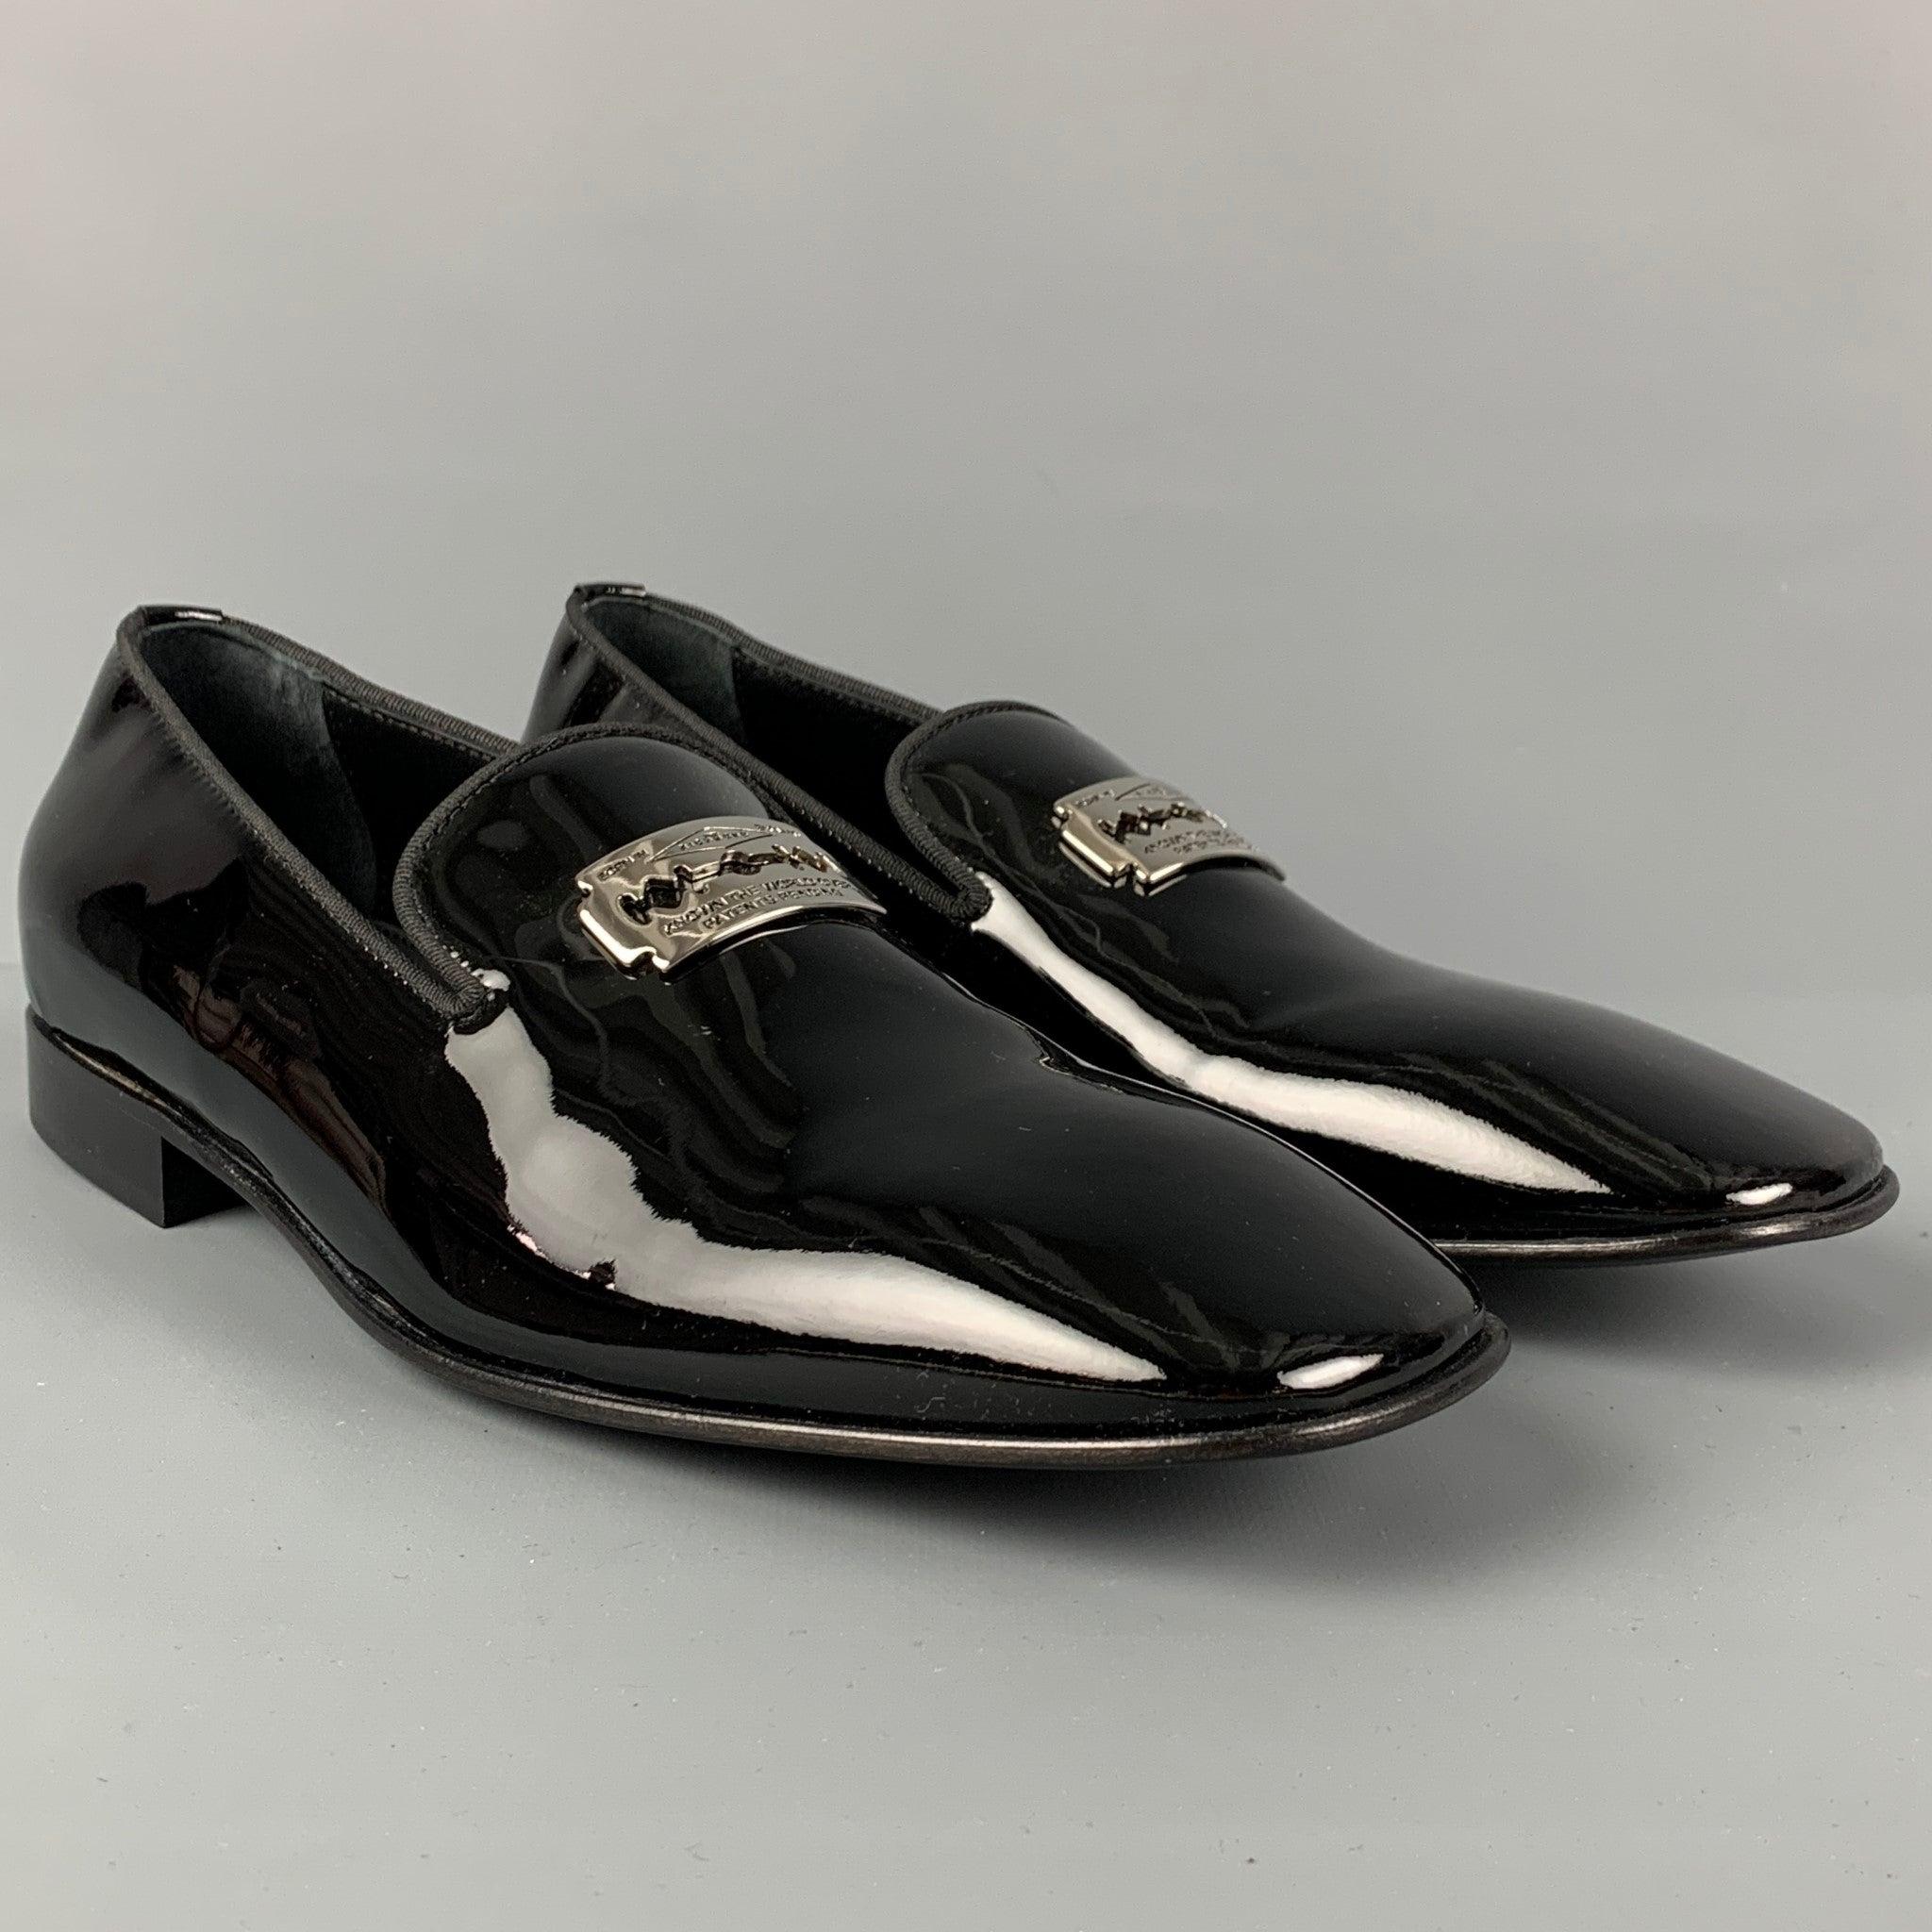 JOHN RICHMOND loafers comes in a black patent leather featuring a silver tone razor blade detail, slip on, square toe, and includes a match belt. Made in Italy. Very Good
Pre-Owned Condition. 

Marked:   42.5Outsole: 12 inches  x 4 inches 
-BeltVery